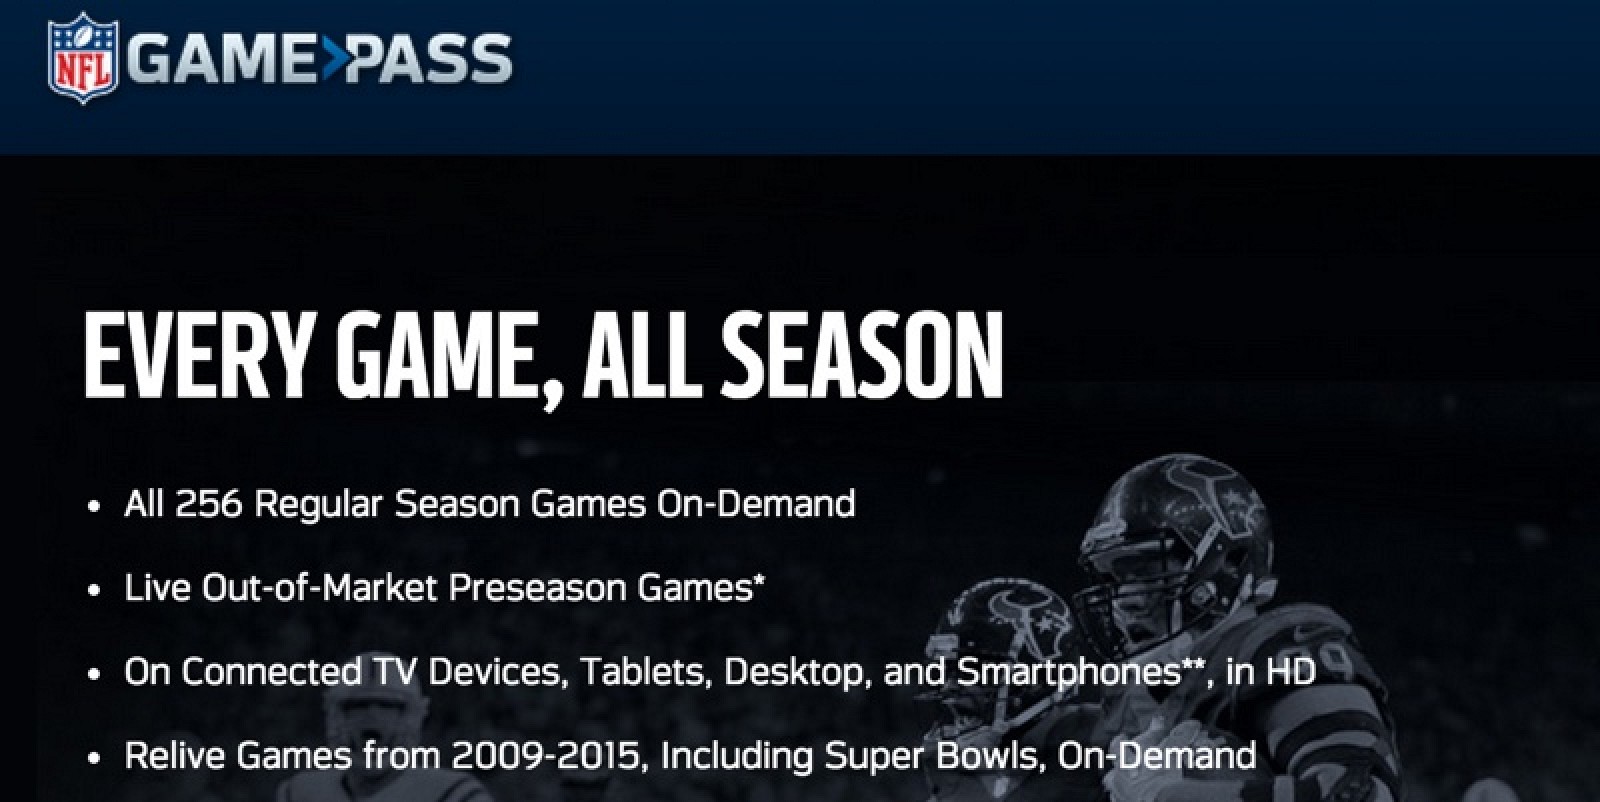 nfl-game-pass-with-on-demand-game-broadcasts-coming-to-apple-tv